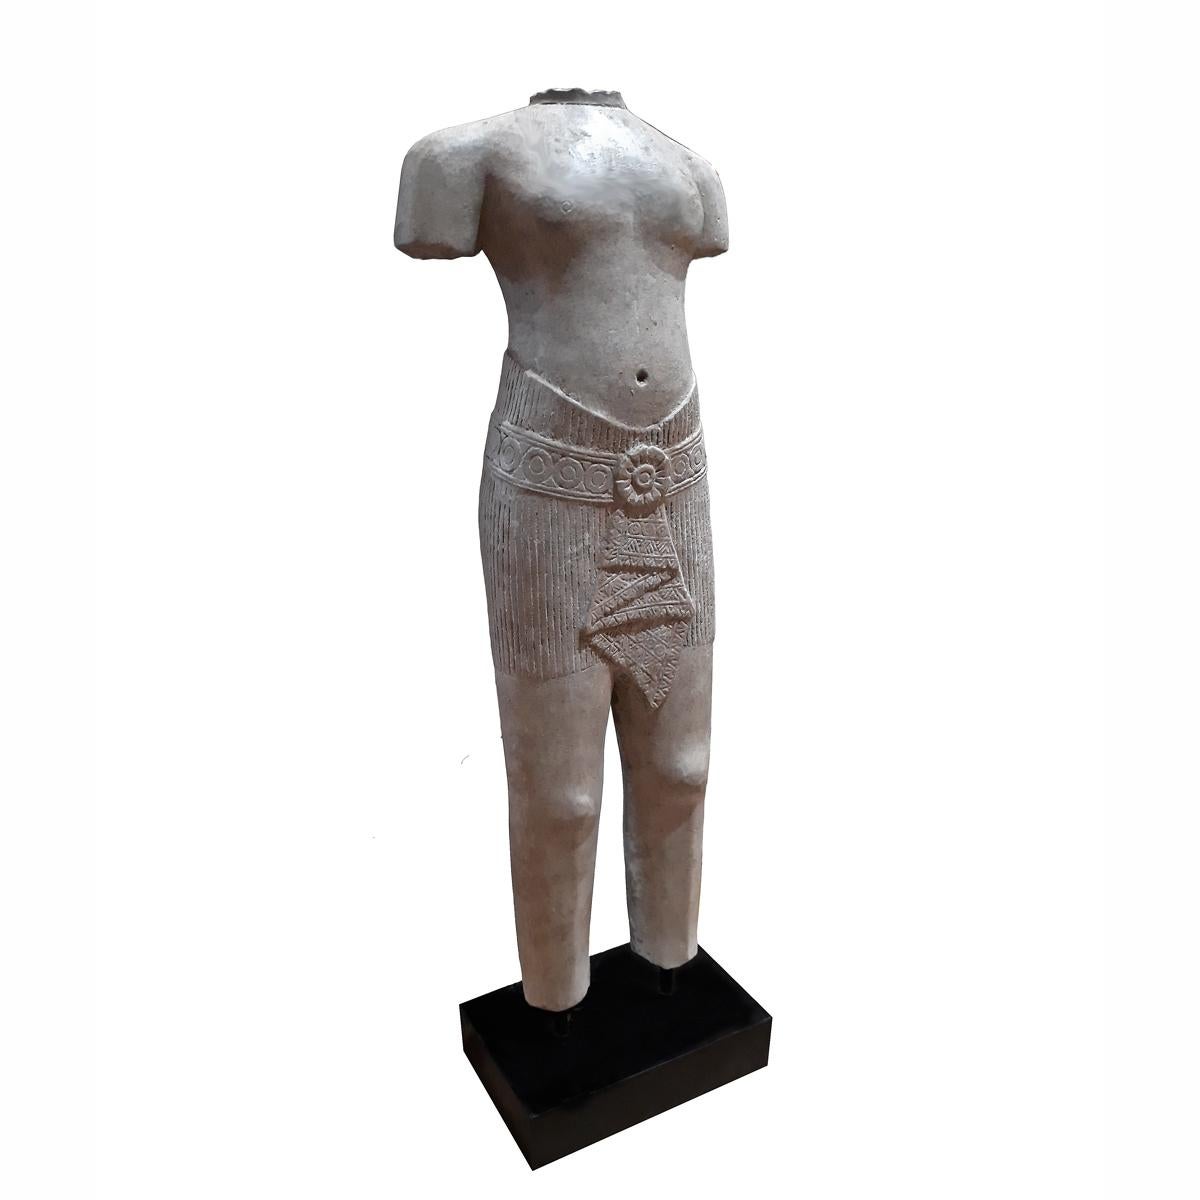 A sculpture of a male torso in traditional attire, hand carved from a single piece of sandstone. From Thailand. Mounted on a wood / metal stand. Size: 27 inches high.